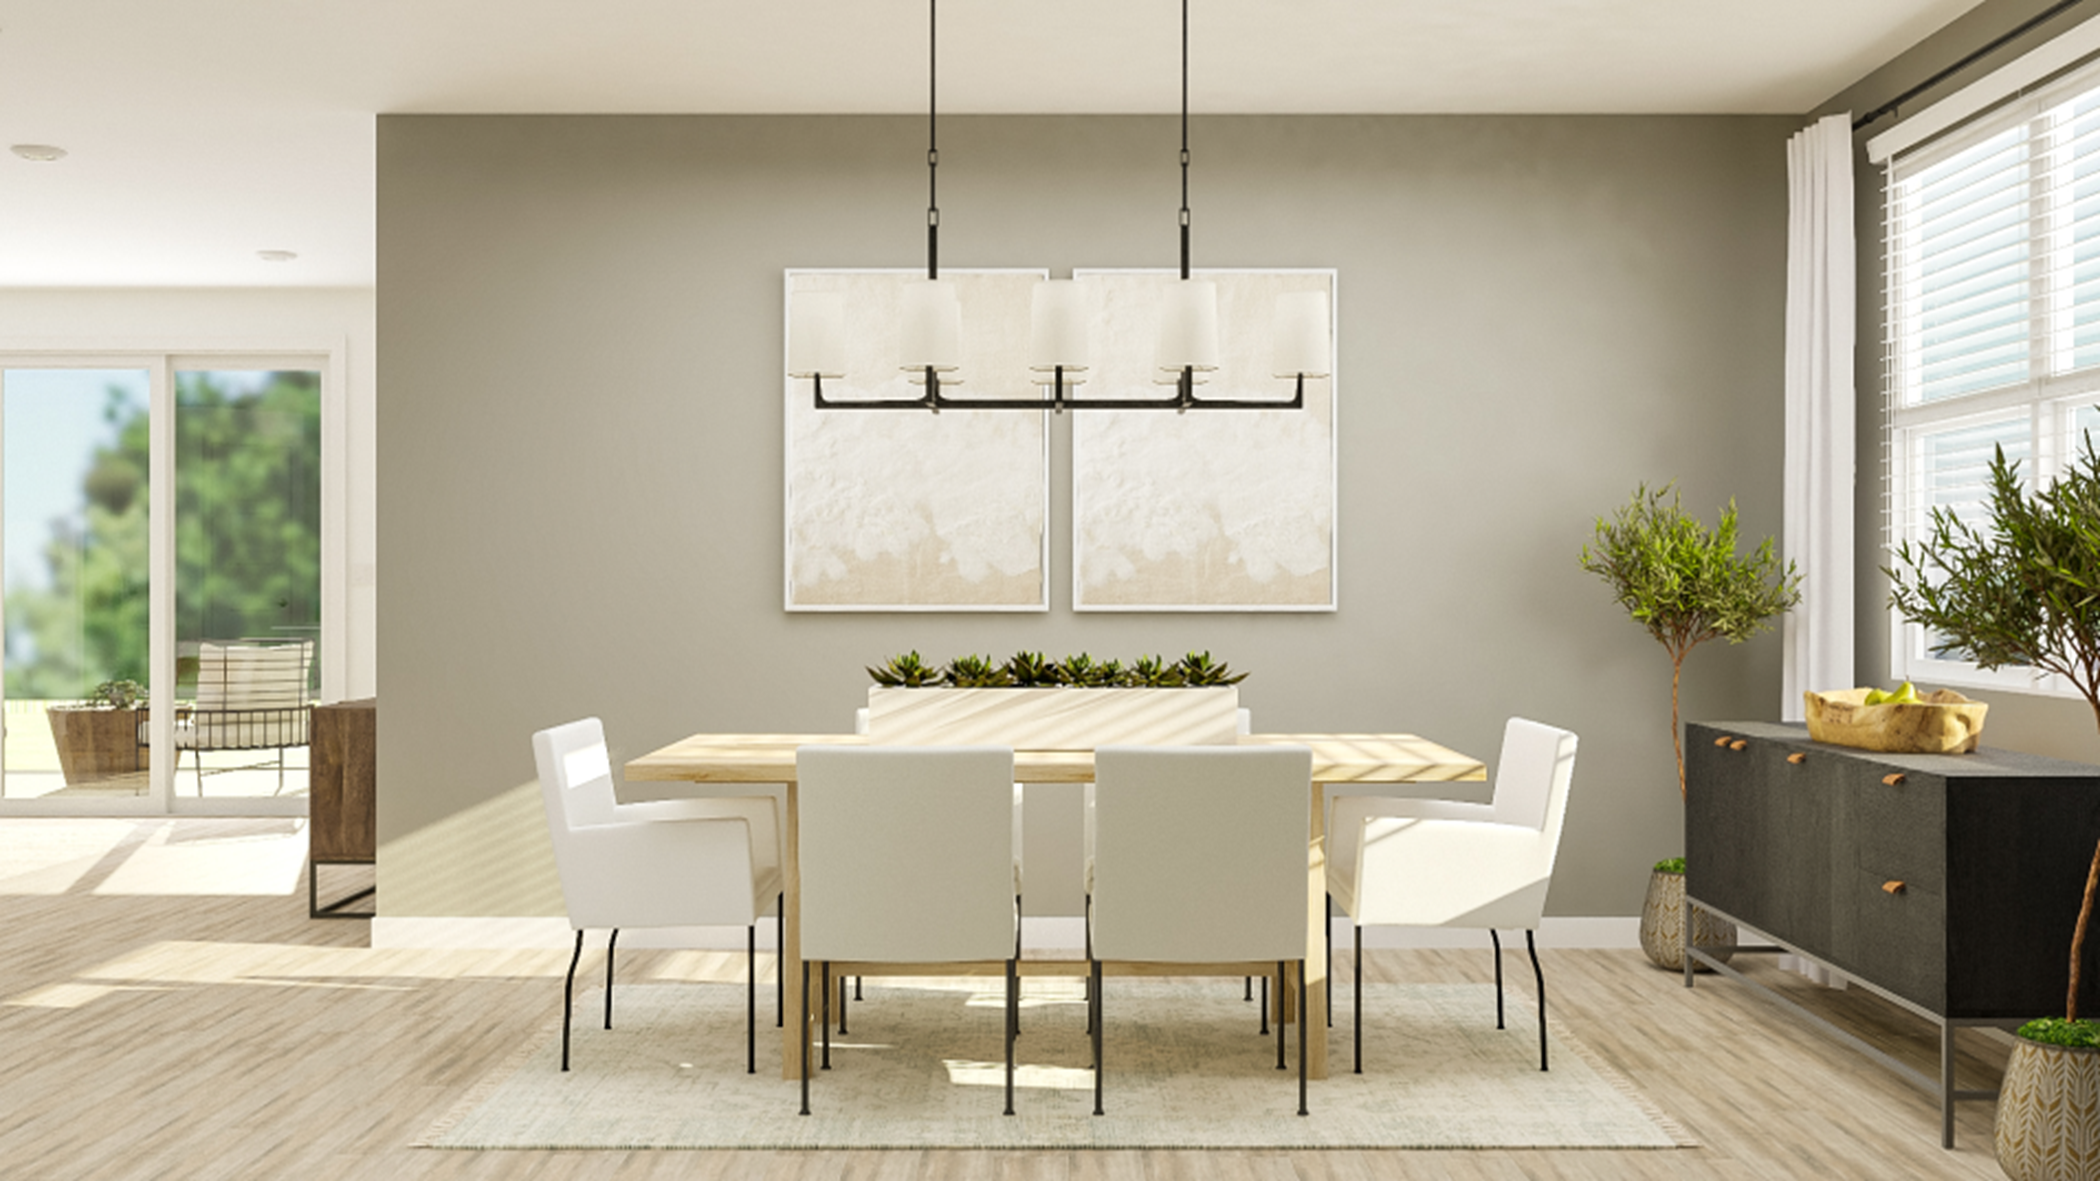 Dining space with table and chairs